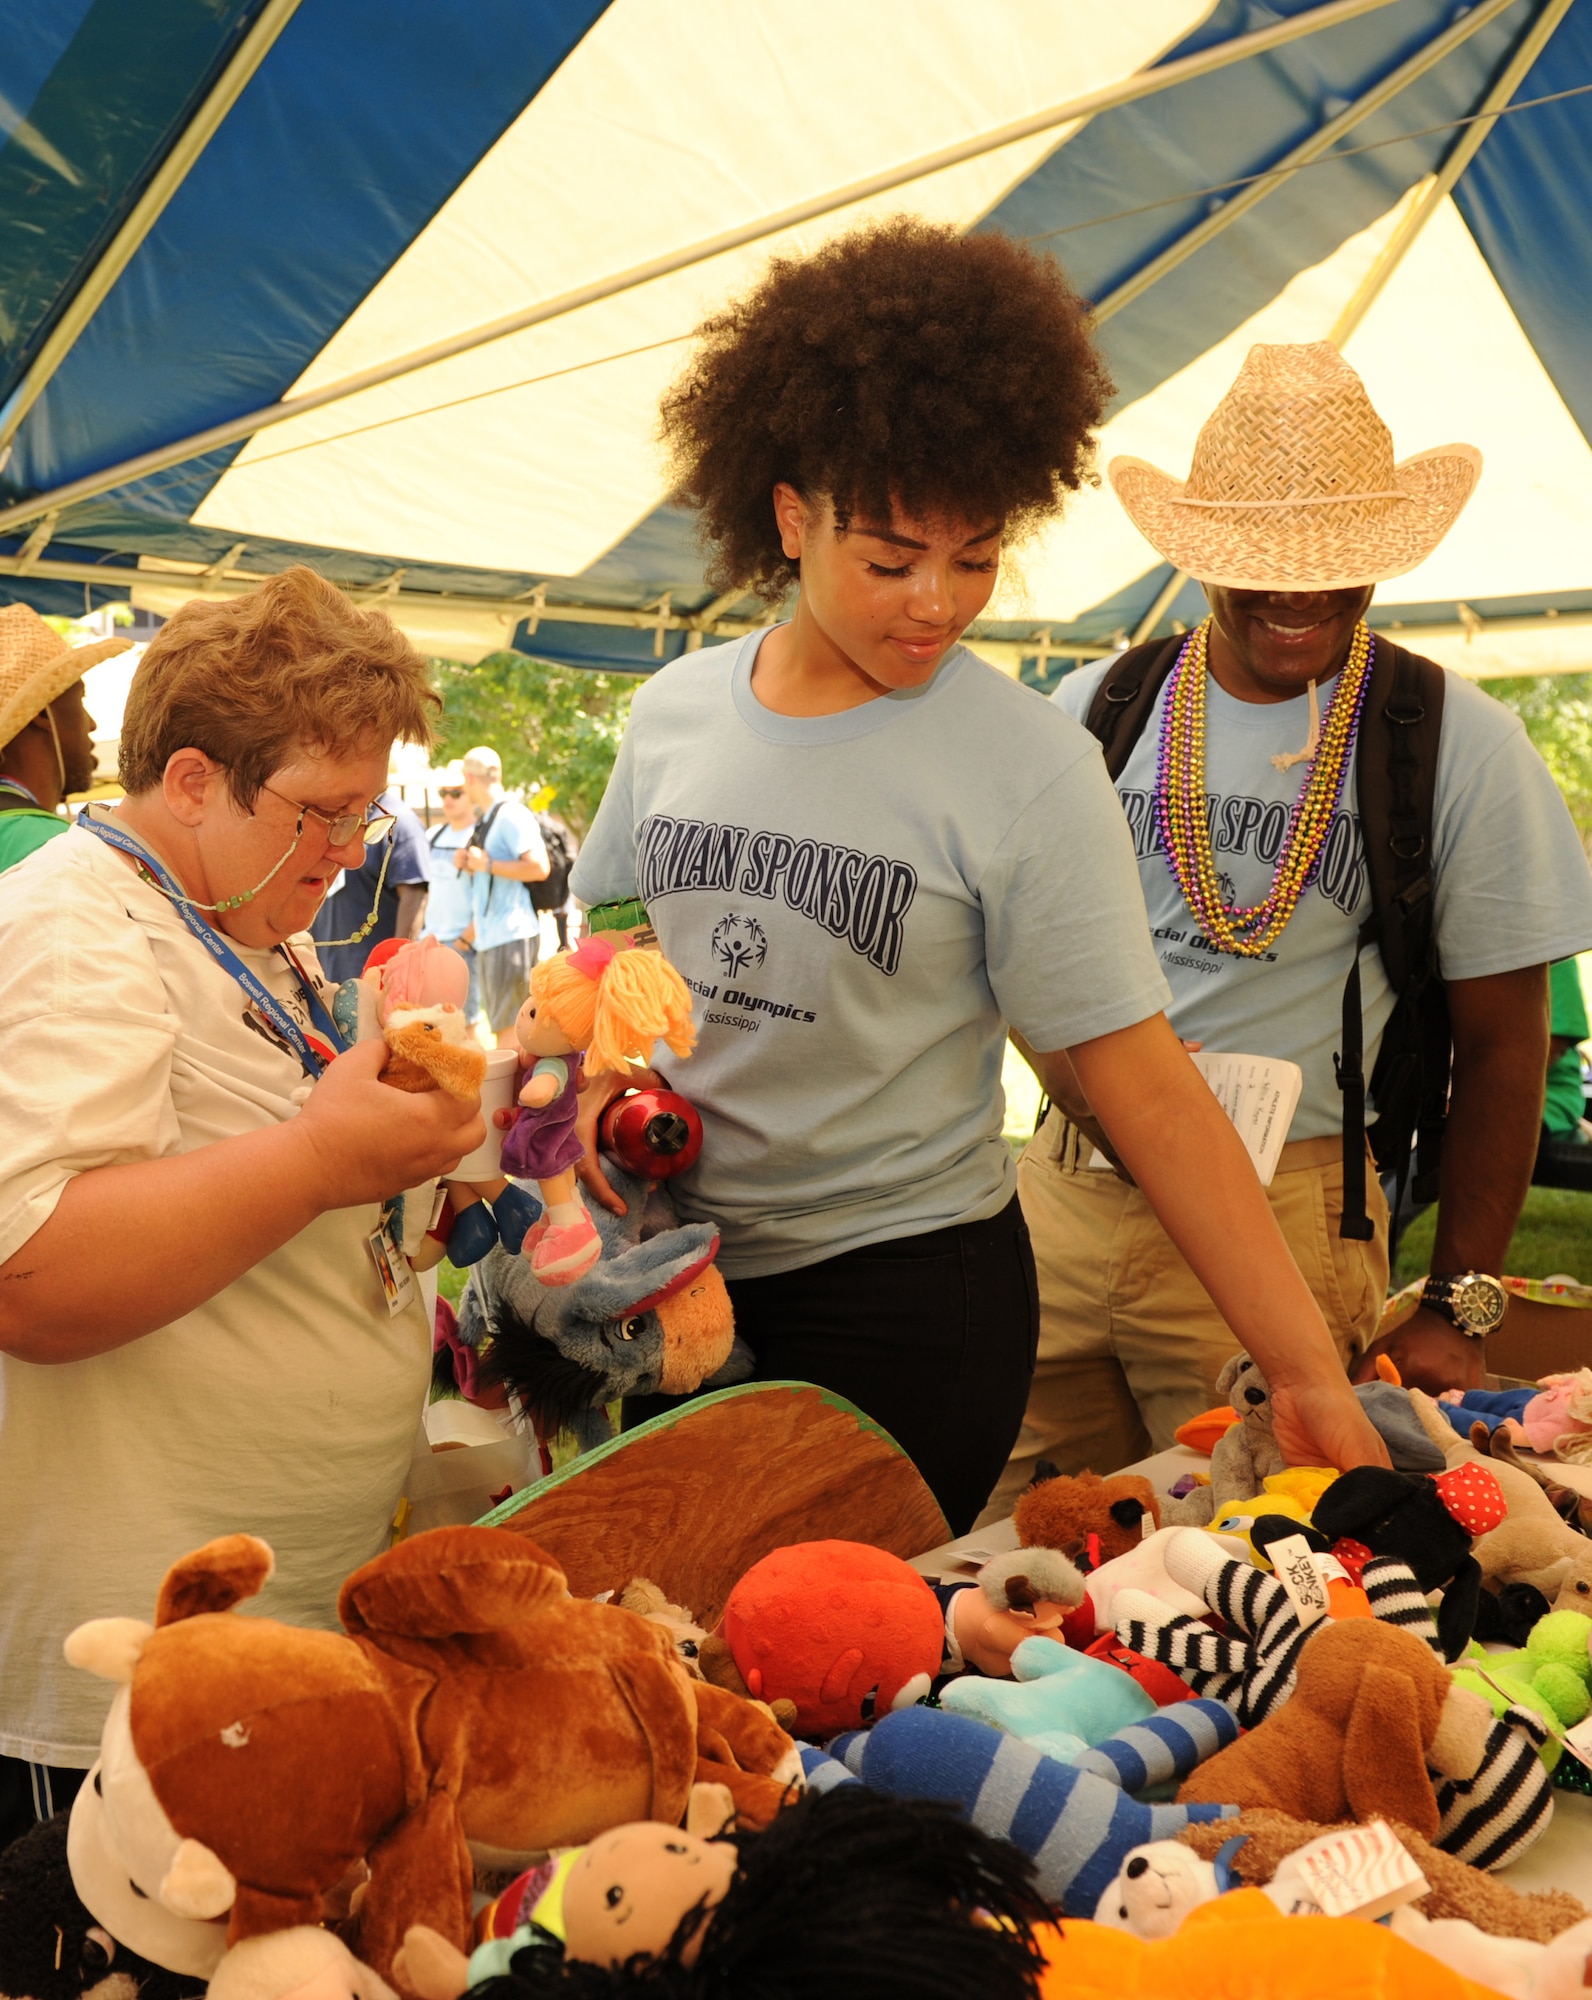 Linda McGriff, Special Olympics athlete, and her Airman sponsors, Airmen Amia Hammett and Ryan Ramjit, 336th Training Squadron students, select stuffed animals at Olympic Village during the Special Olympics Mississippi Summer Games May 21, 2016, Keesler Air Force Base, Miss. More than 700 athletes and 3,000 volunteers worked together to hold competitions throughout the day. This is the 30th year Keesler has hosted the state Special Olympics.  (U.S. Air Force photo by Kemberly Groue)